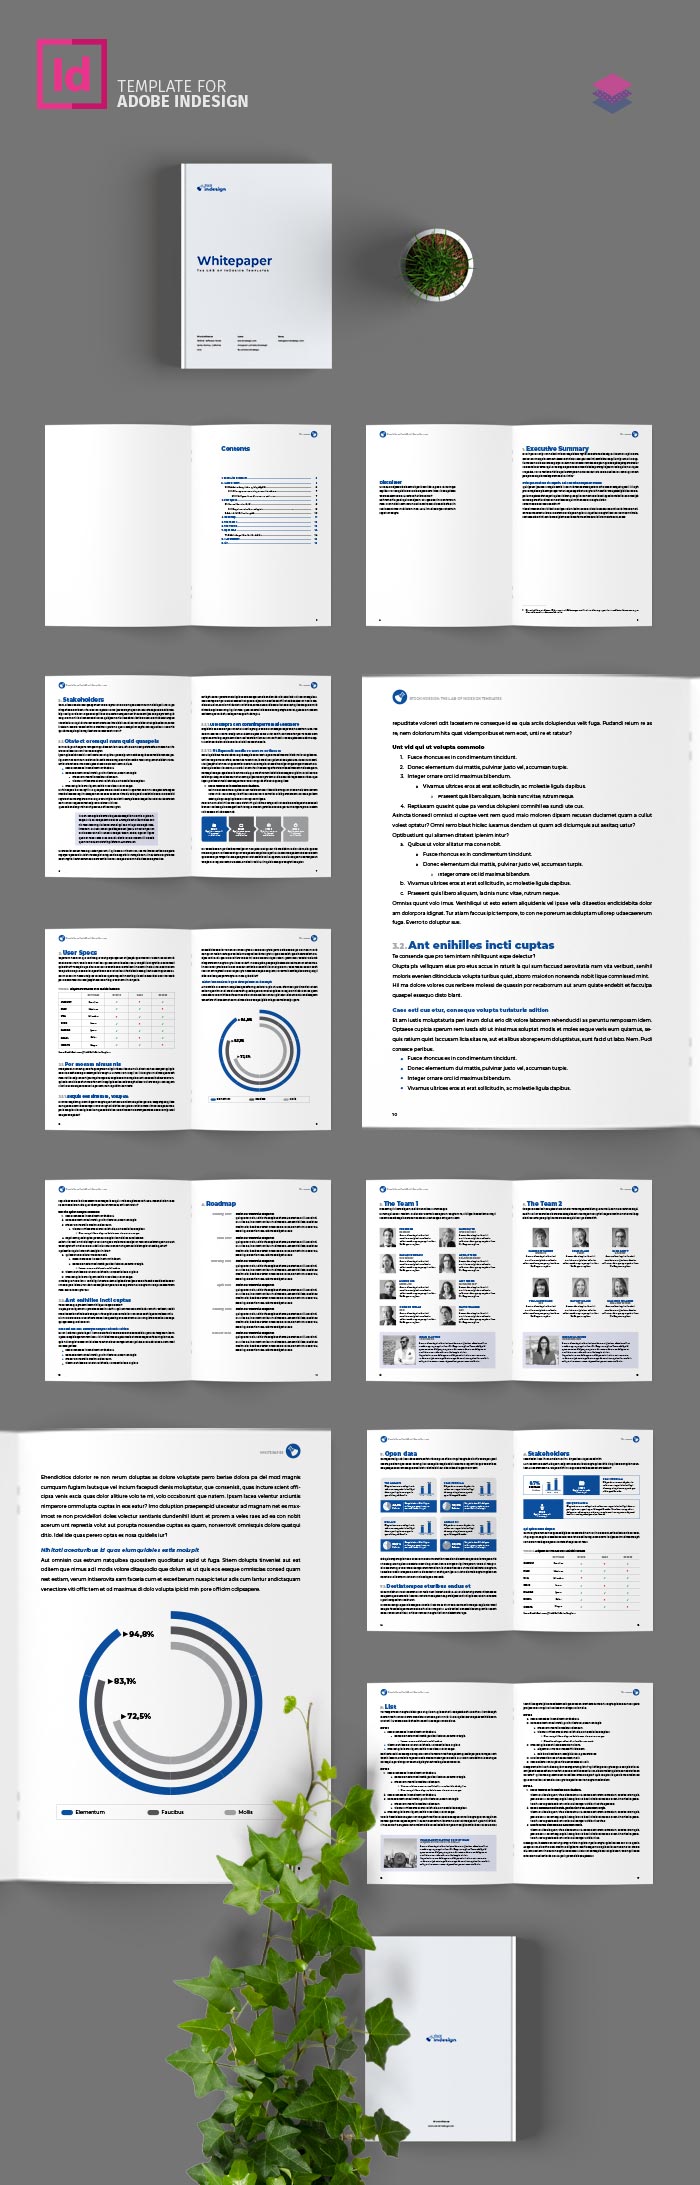 Whitepaper Template for InDesign